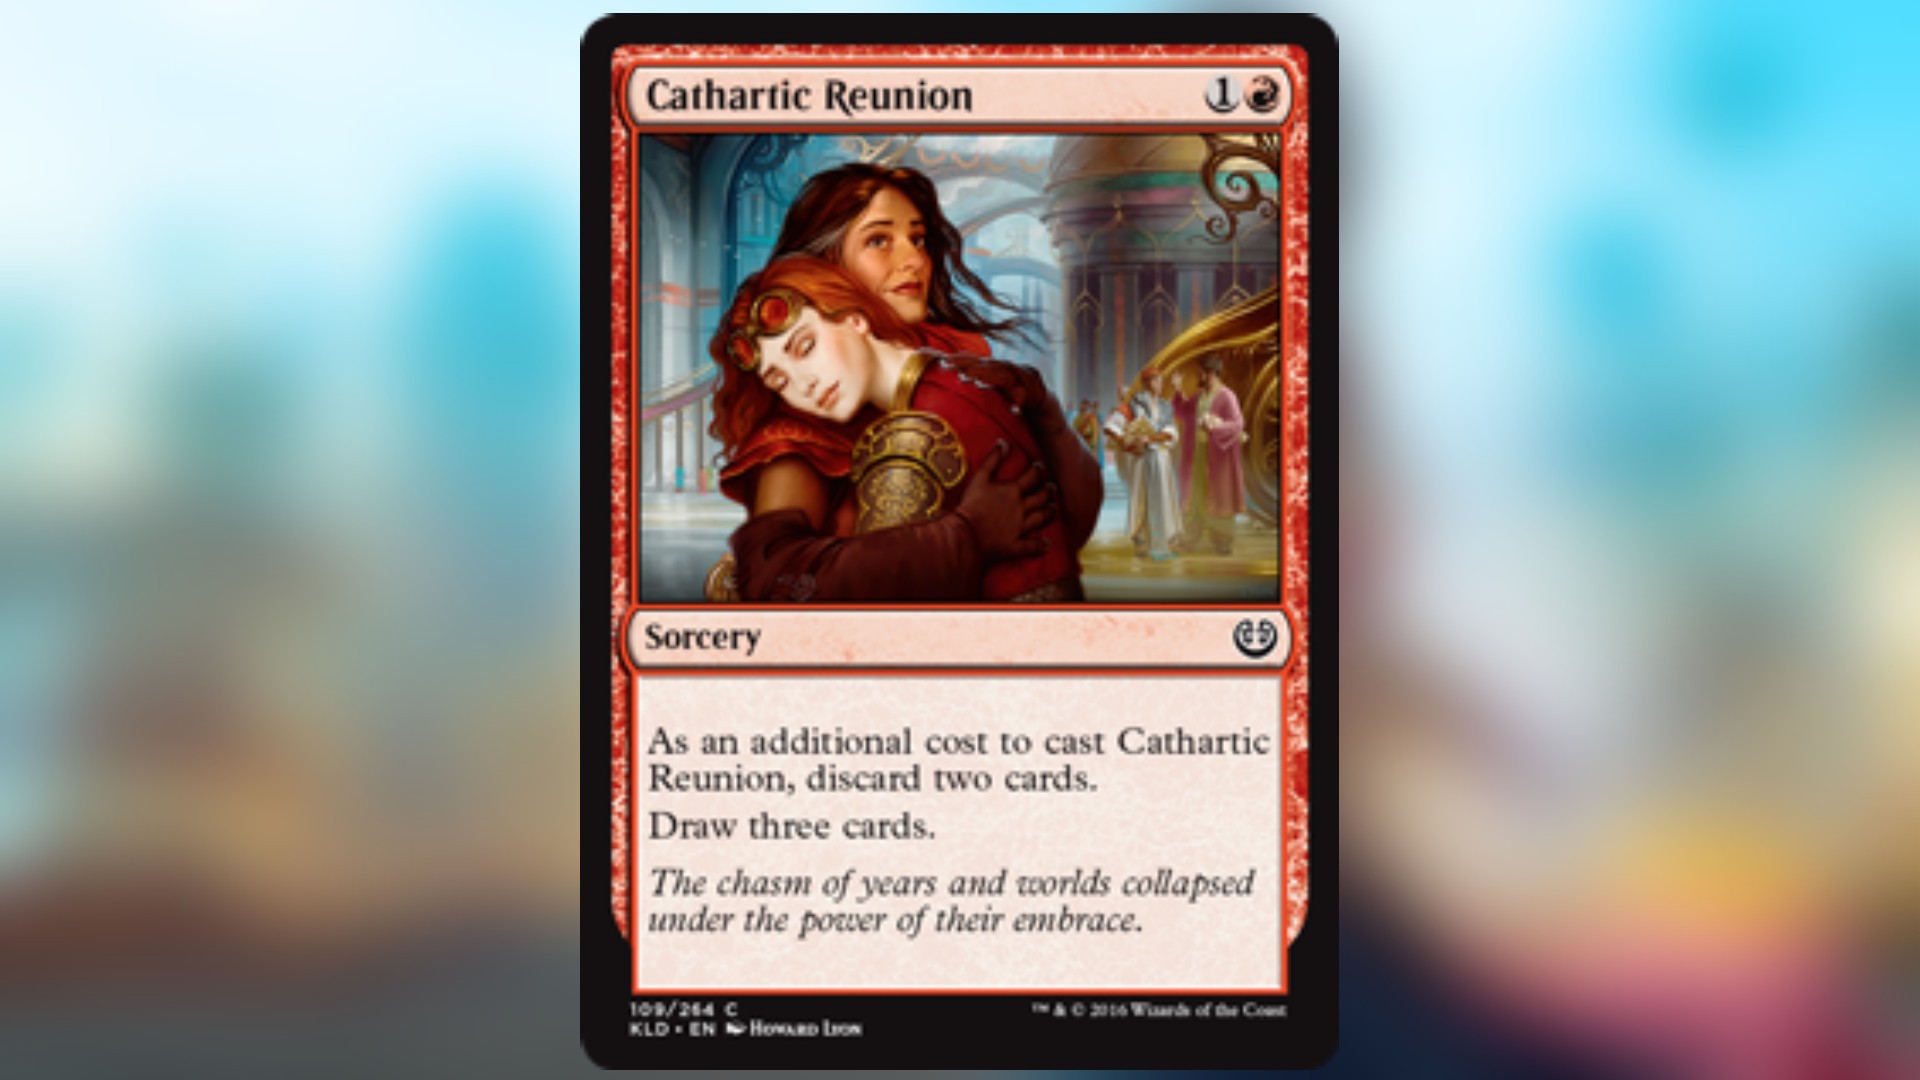 magic the gathering card in red with art featuring two woman sharing an embrace